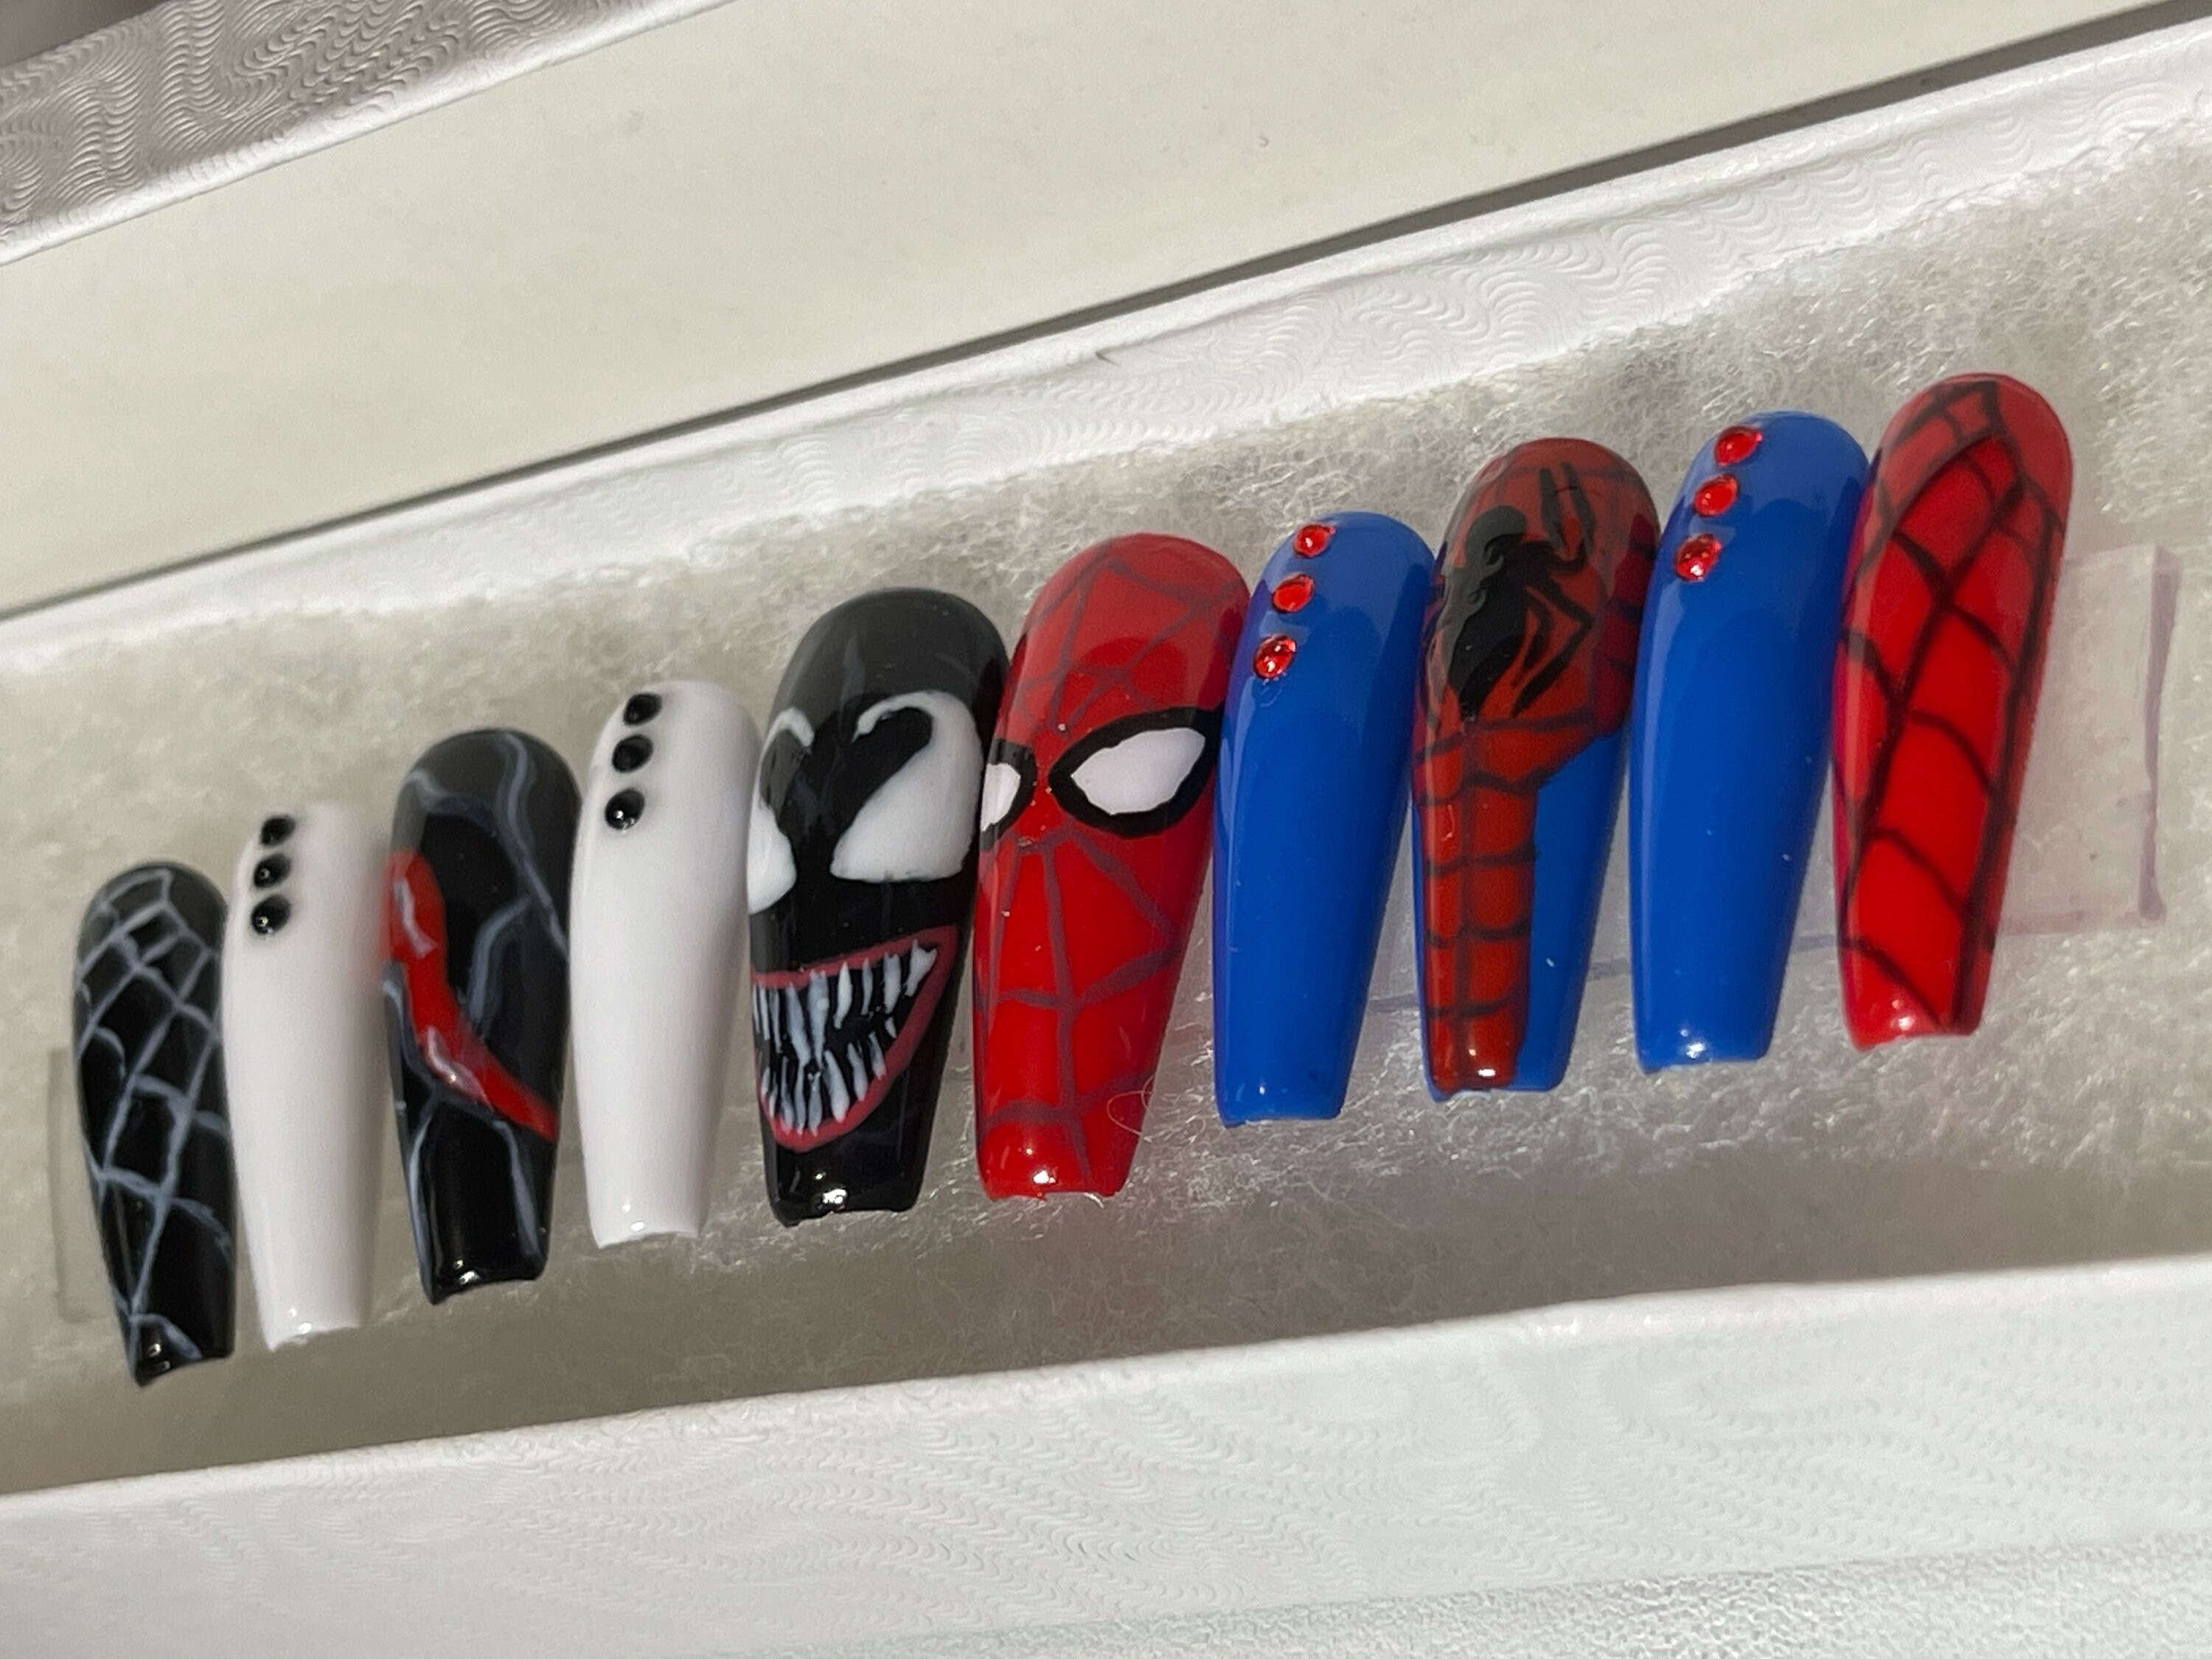 Spiderman Nail Art by PinkPixieDF